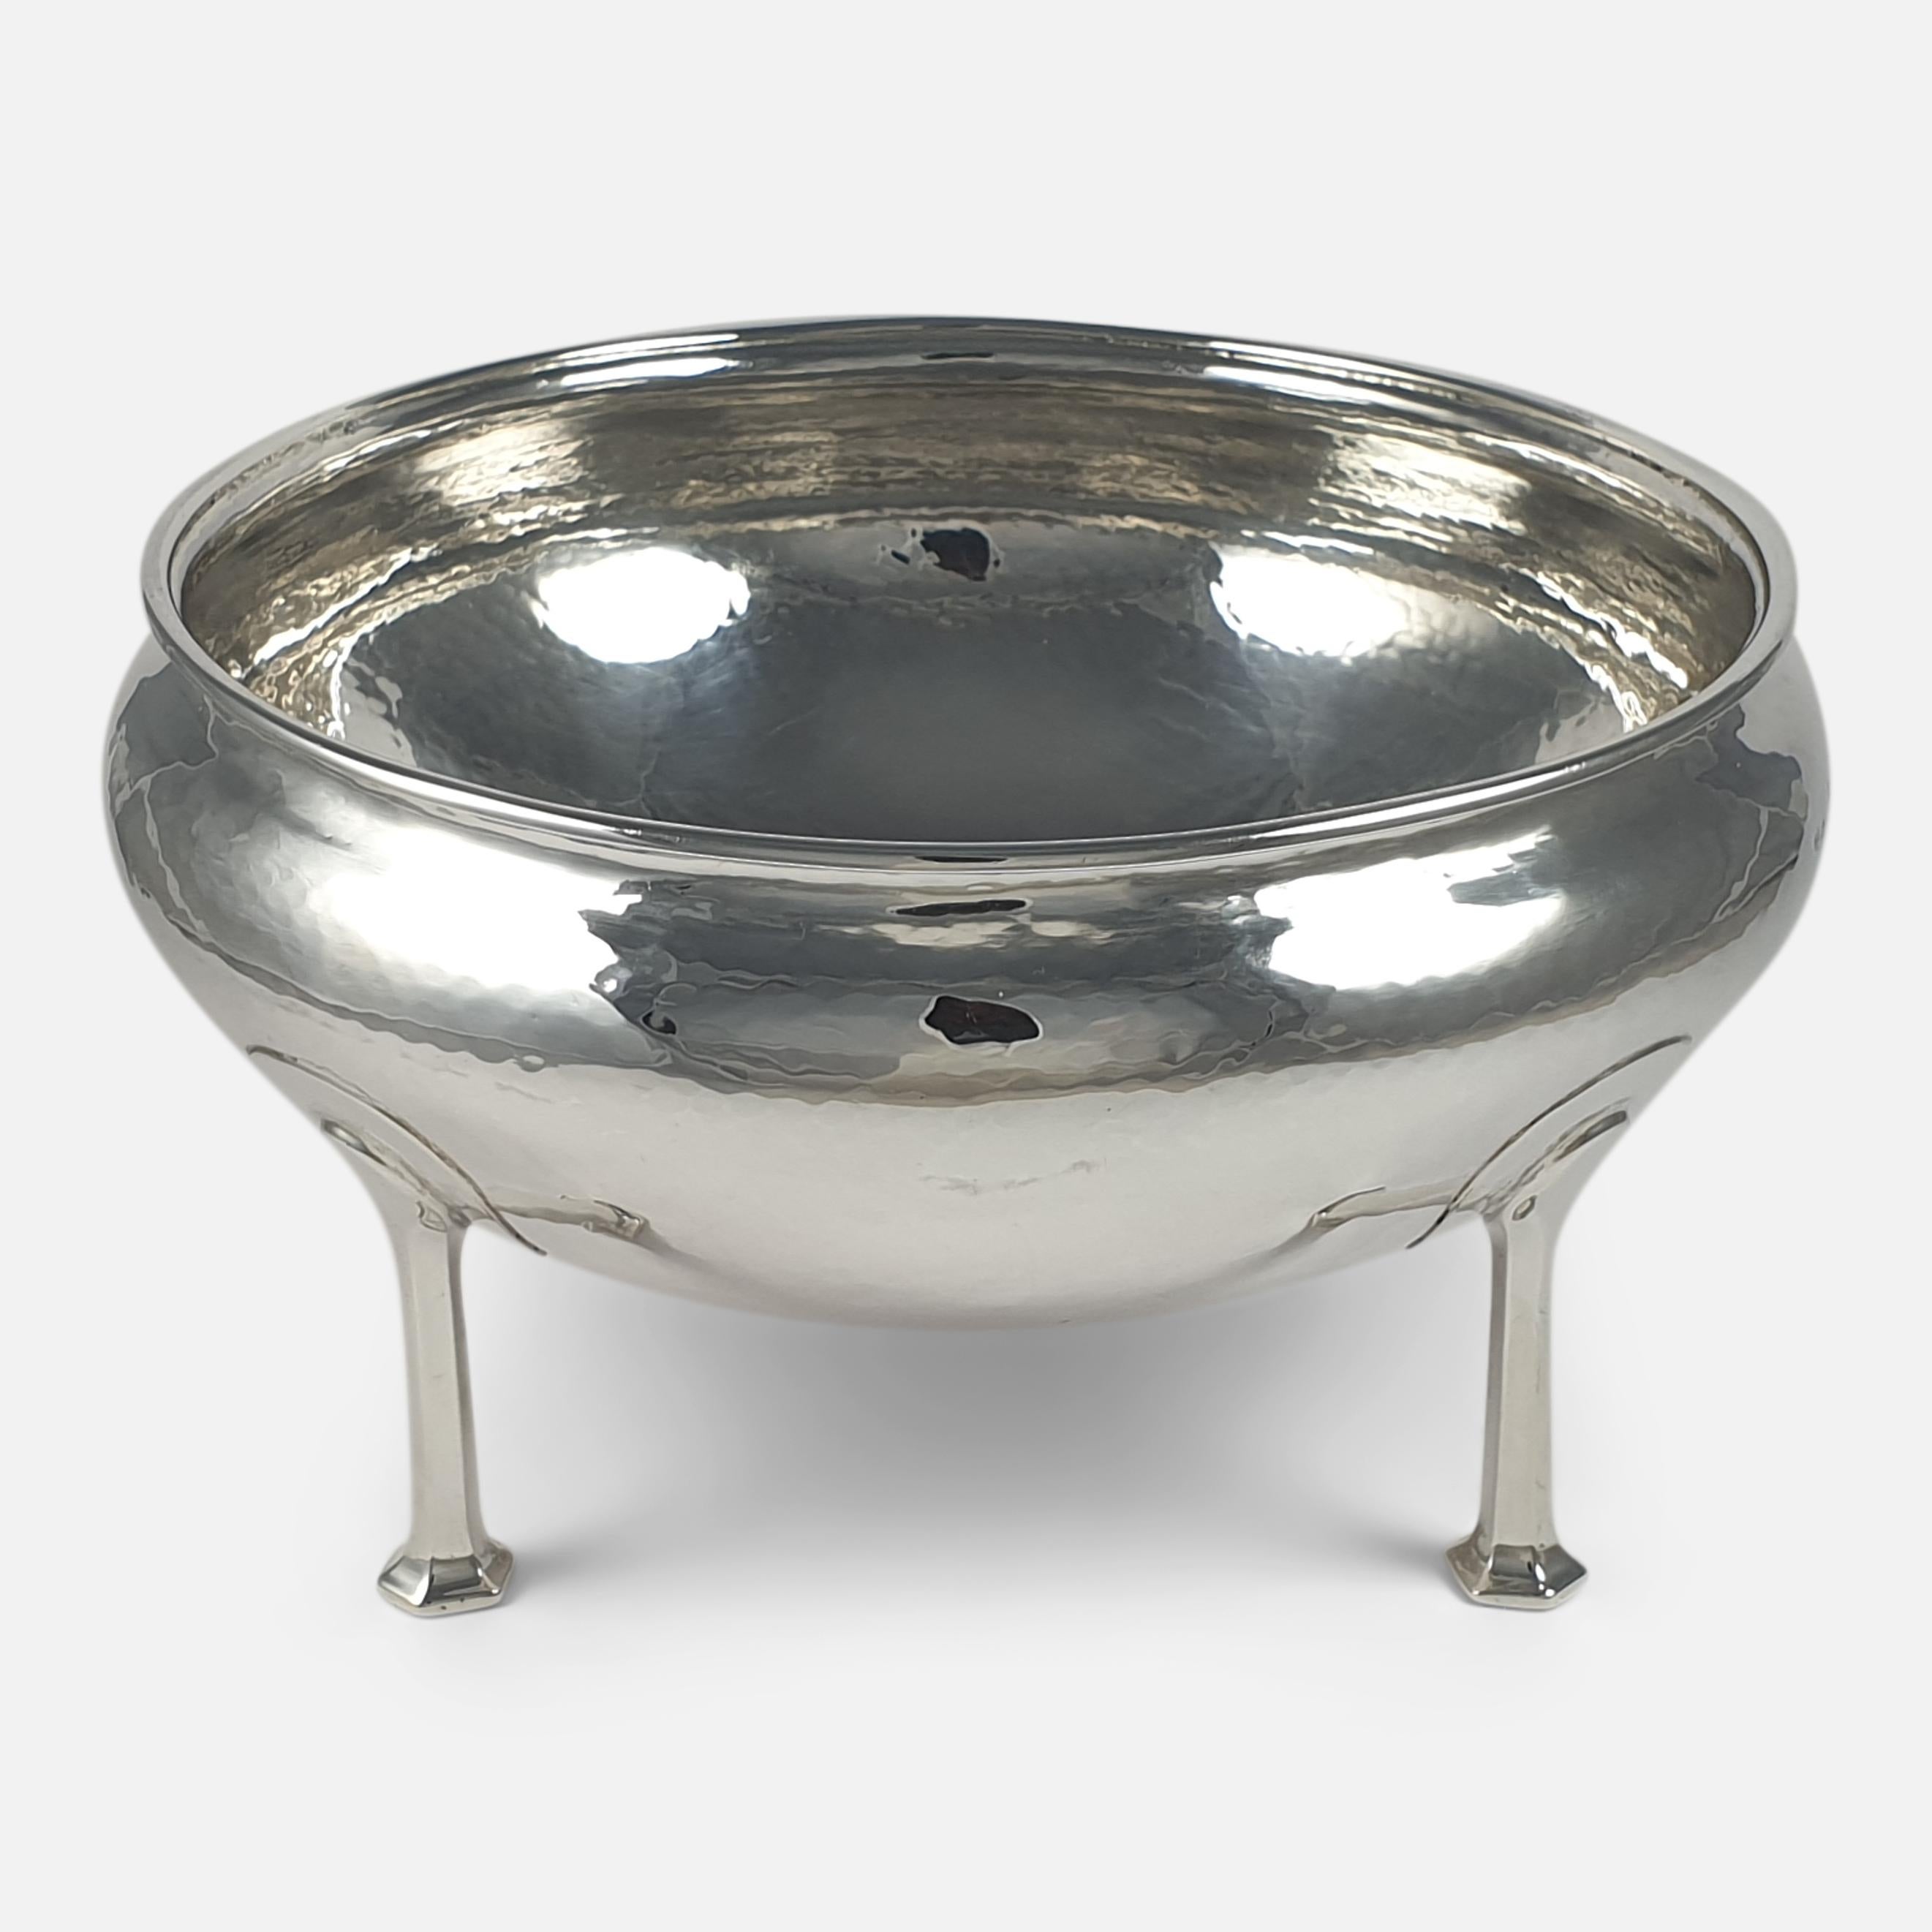 A George V sterling silver Arts & Crafts bowl by A. E. Jones, Birmingham, 1912. The bowl is of circular form, with spot-hammered decoration, applied moulded border to the rim of the body, and sitting on four long hexagonal bracket feet.

Assay: